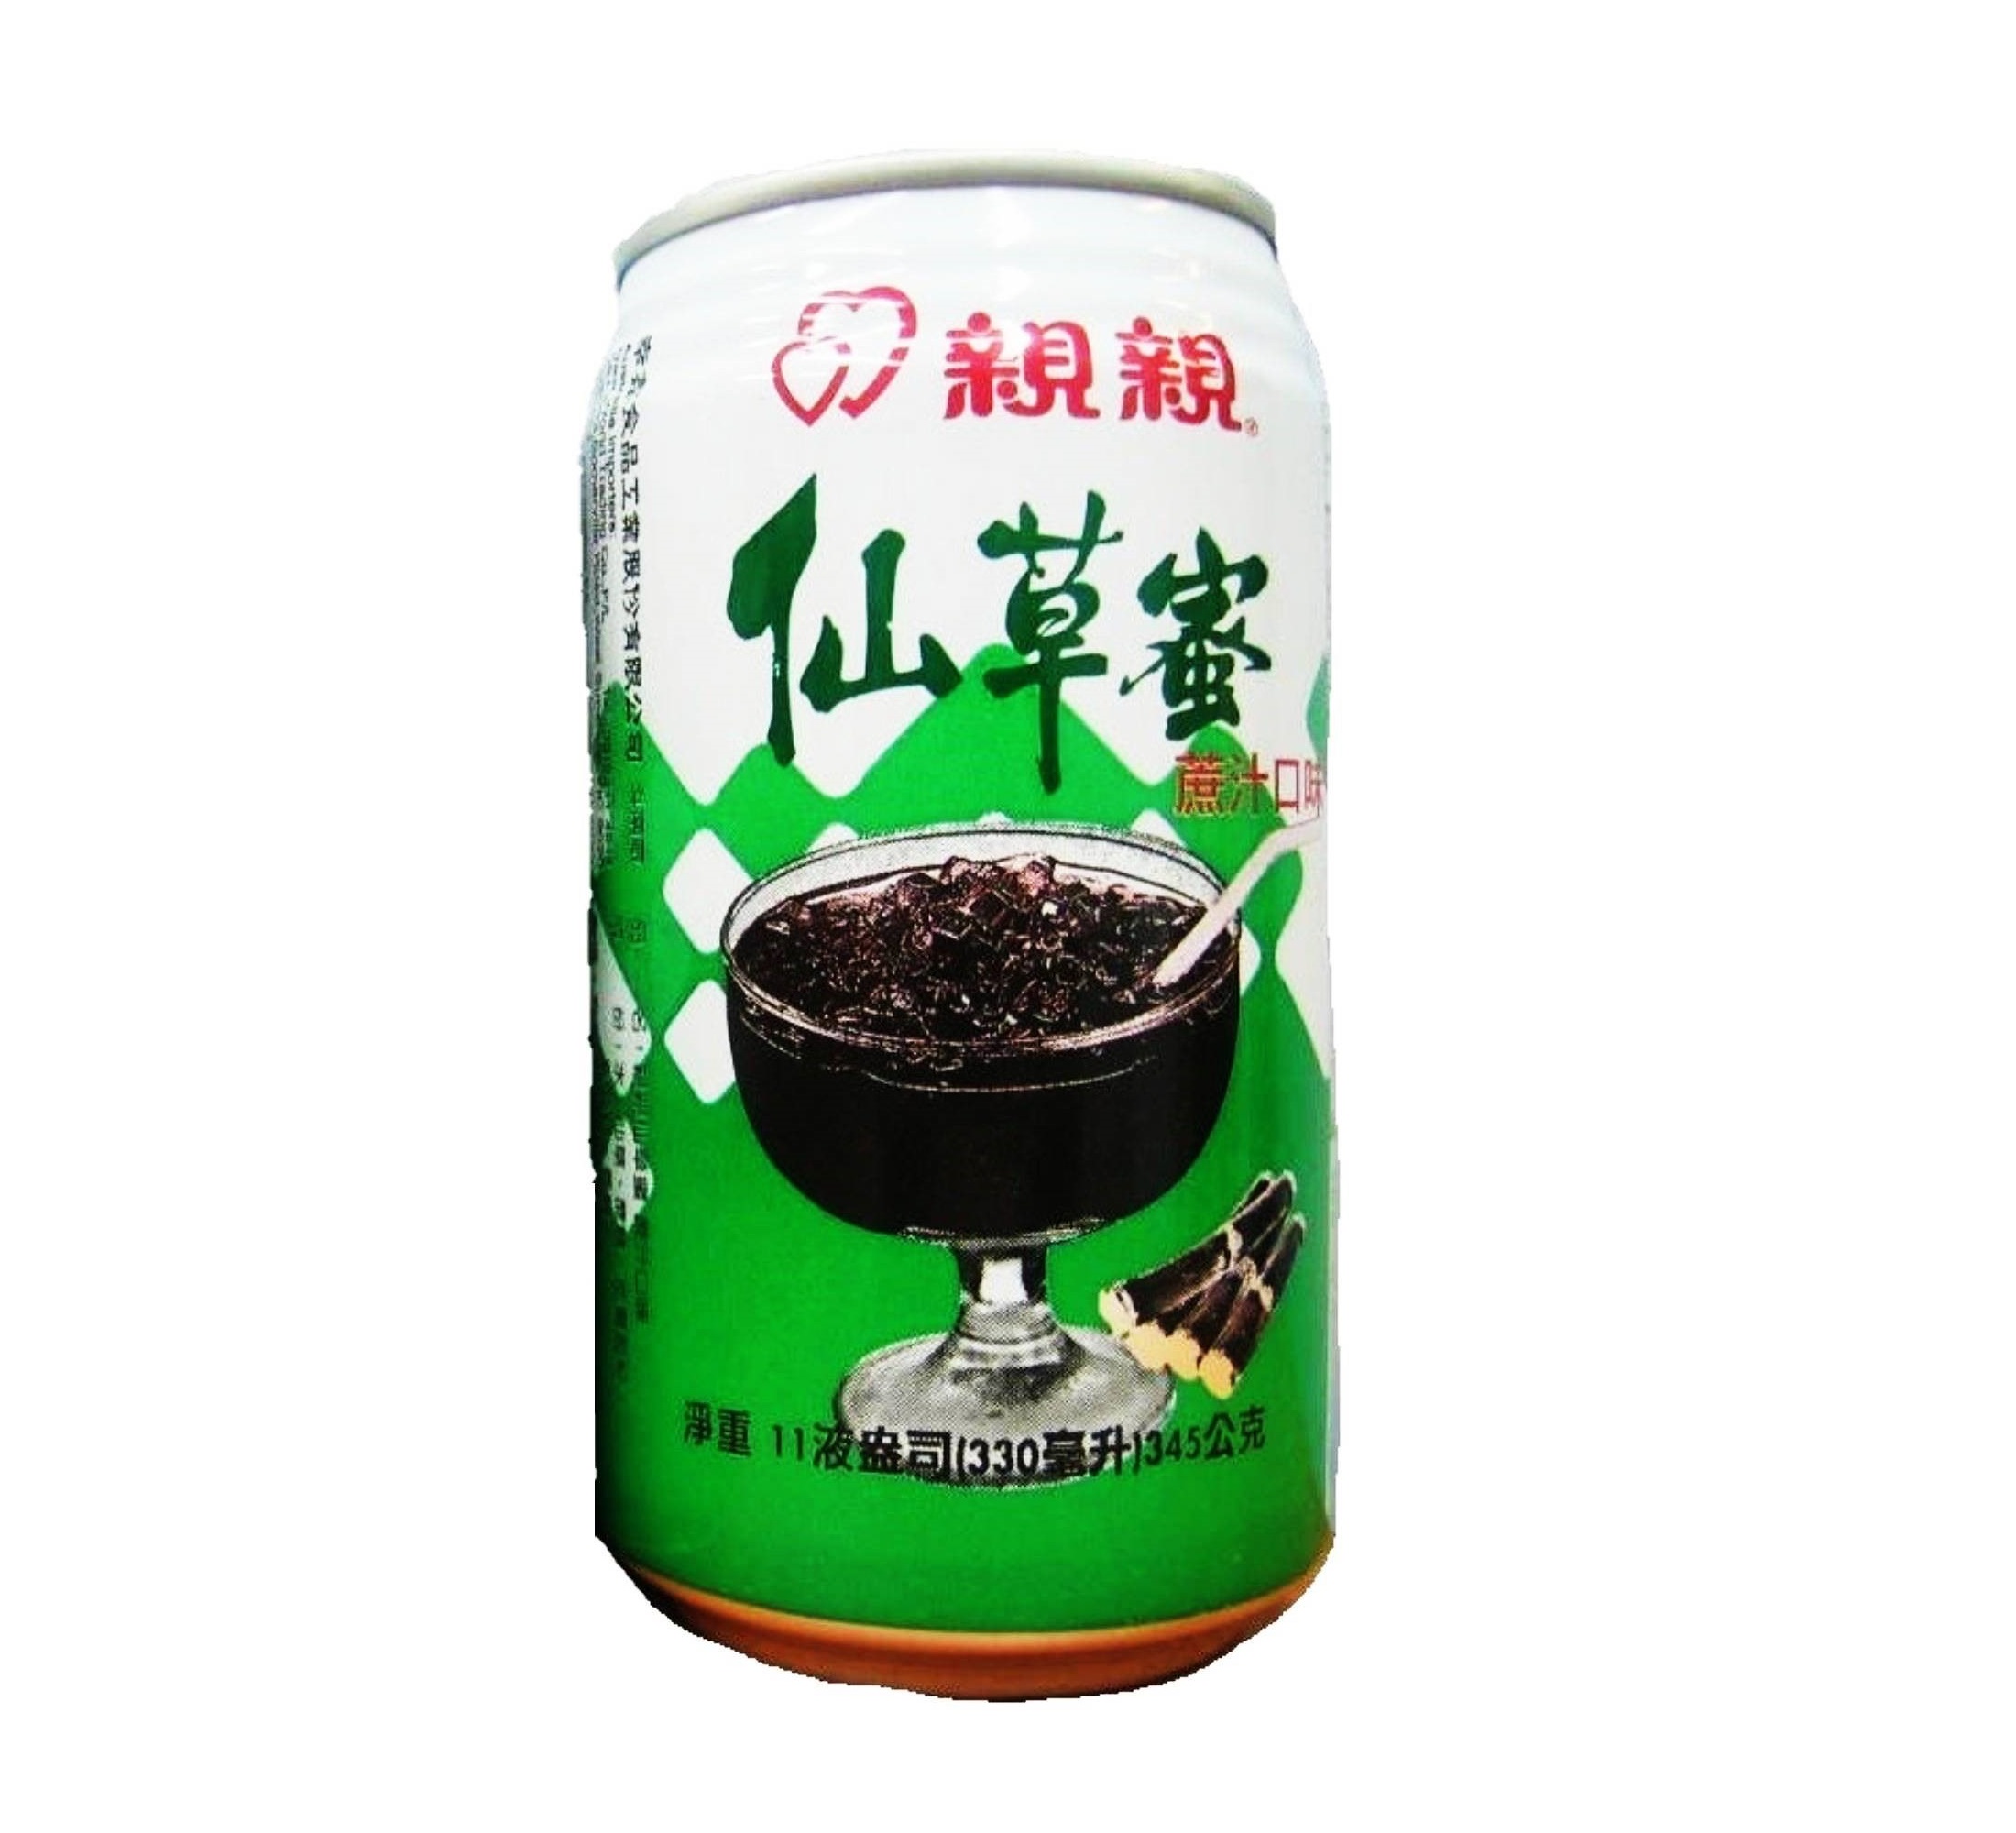 CHIN CHIN SUGARCANE GRASS JELLY DRINK DR110054